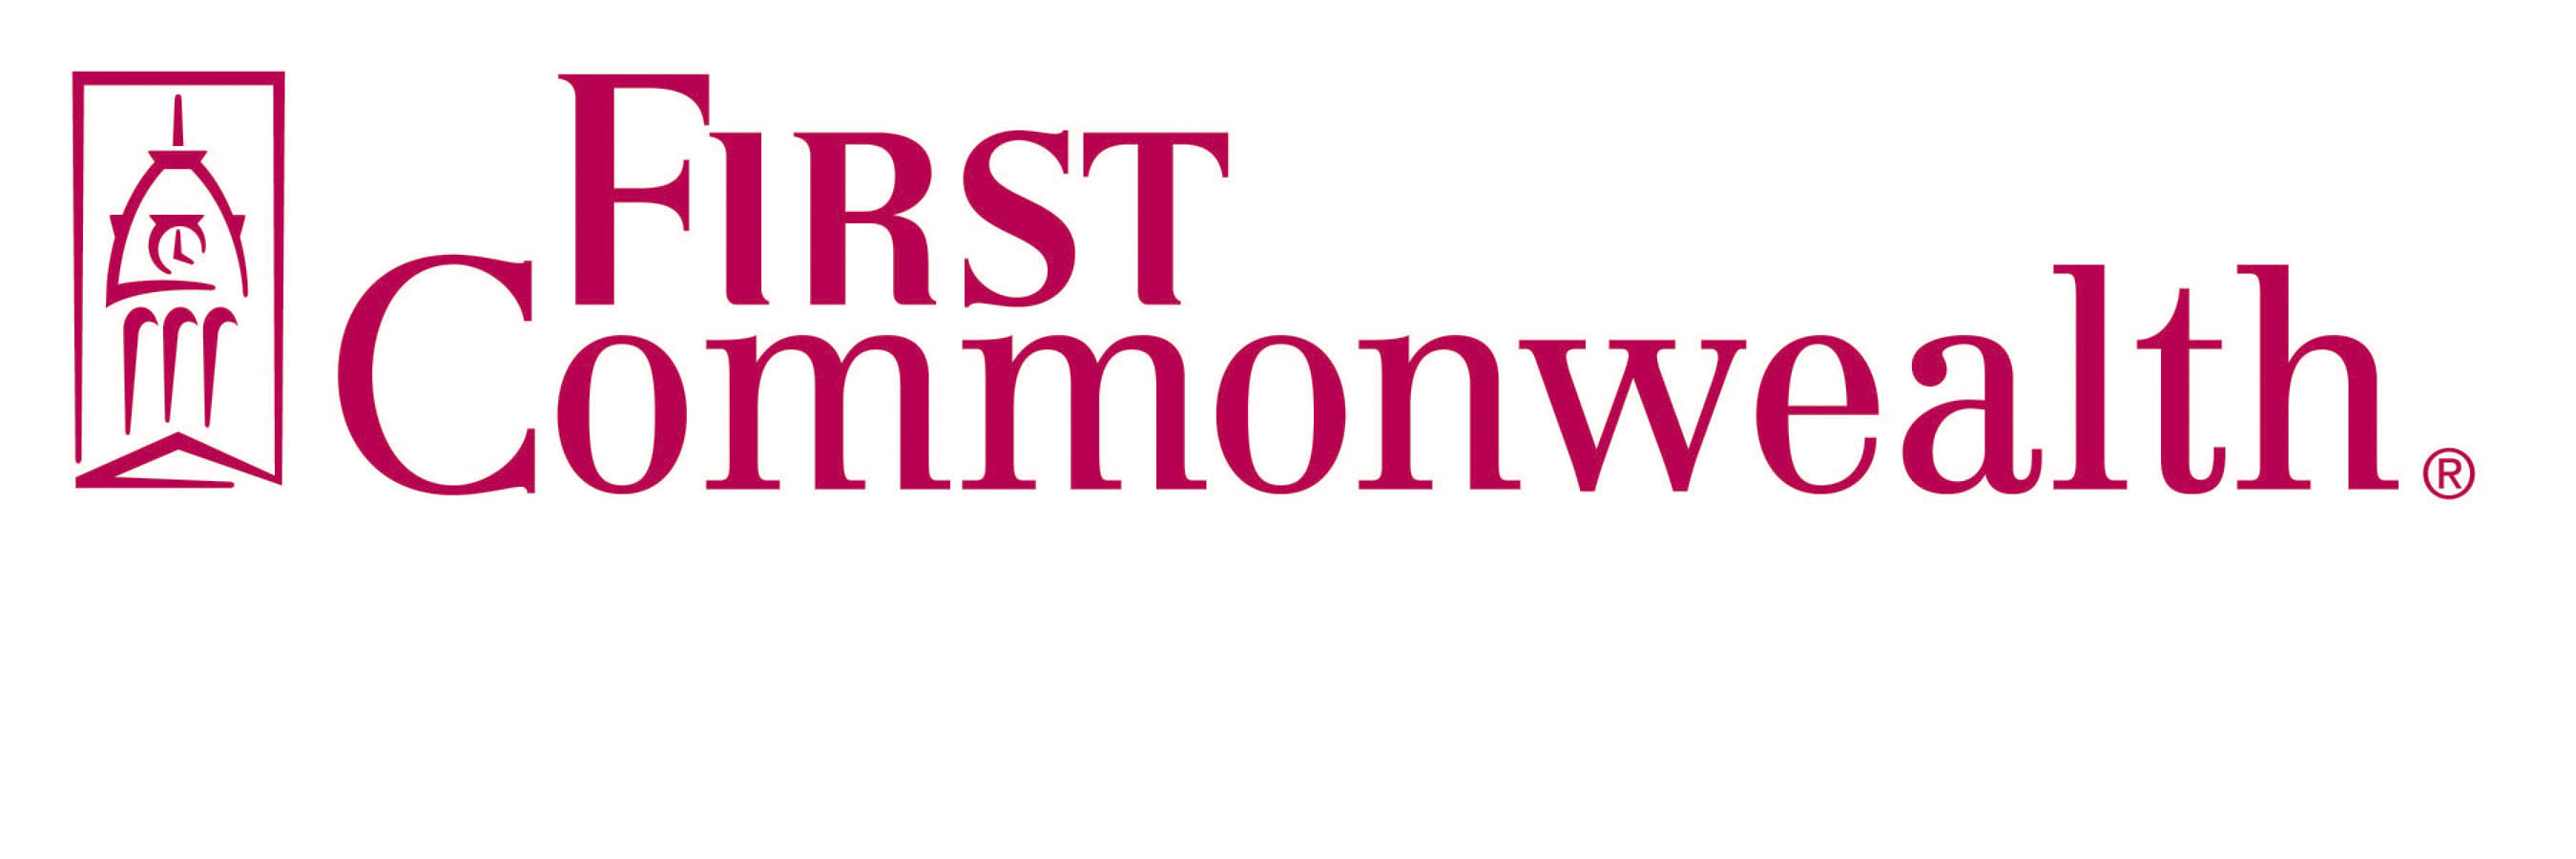 First Commonwealth Financial Corporation logo